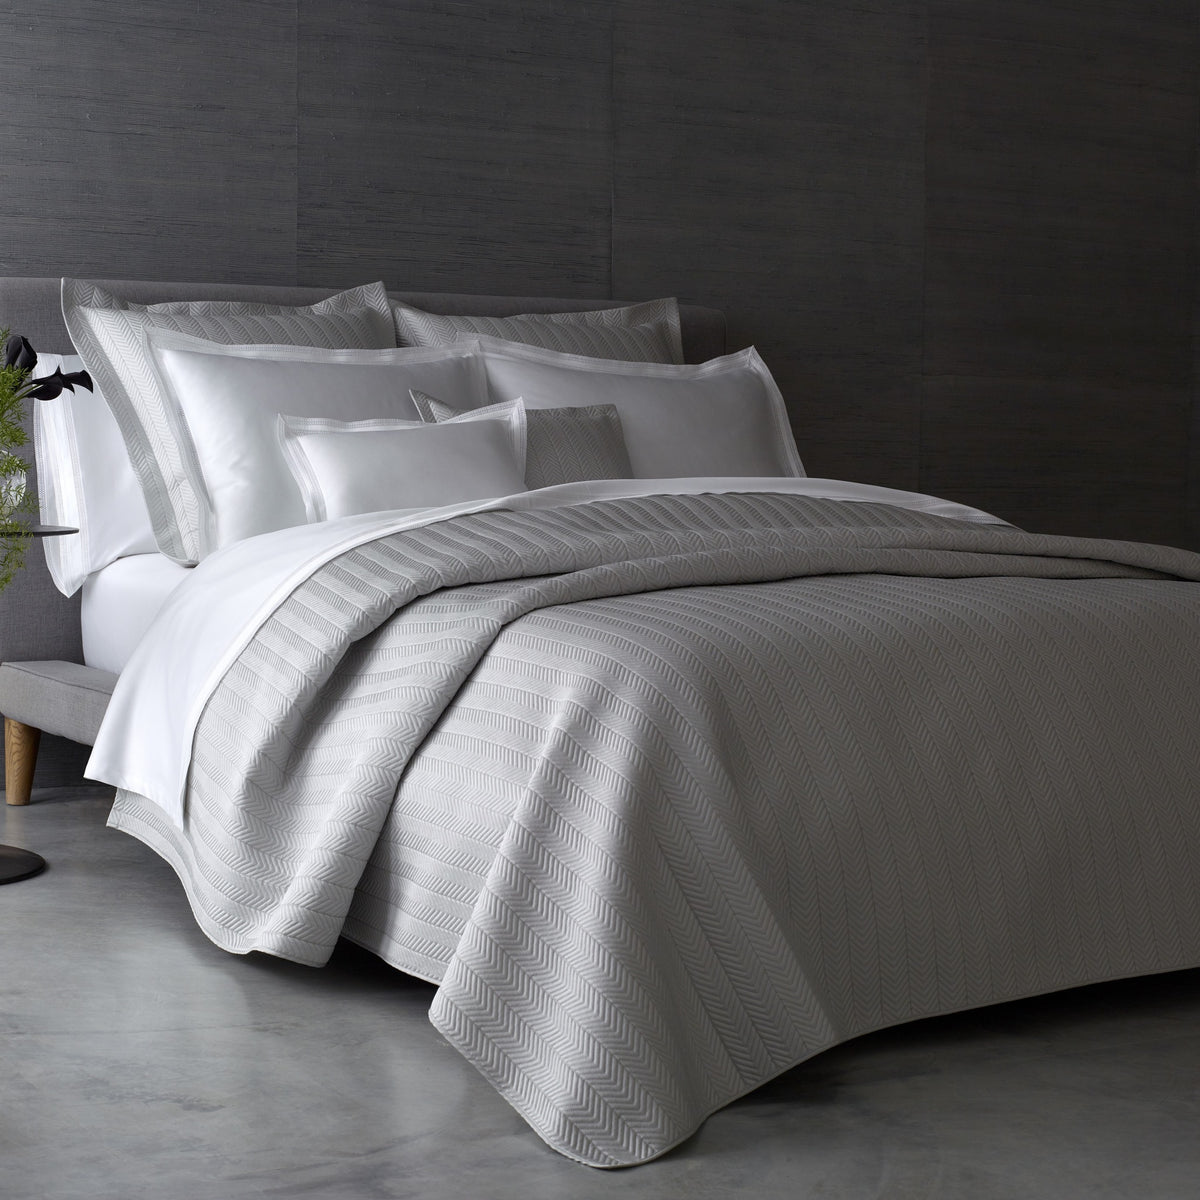 Full Bed Dressed in Matouk Netto Bedding with Silver Color